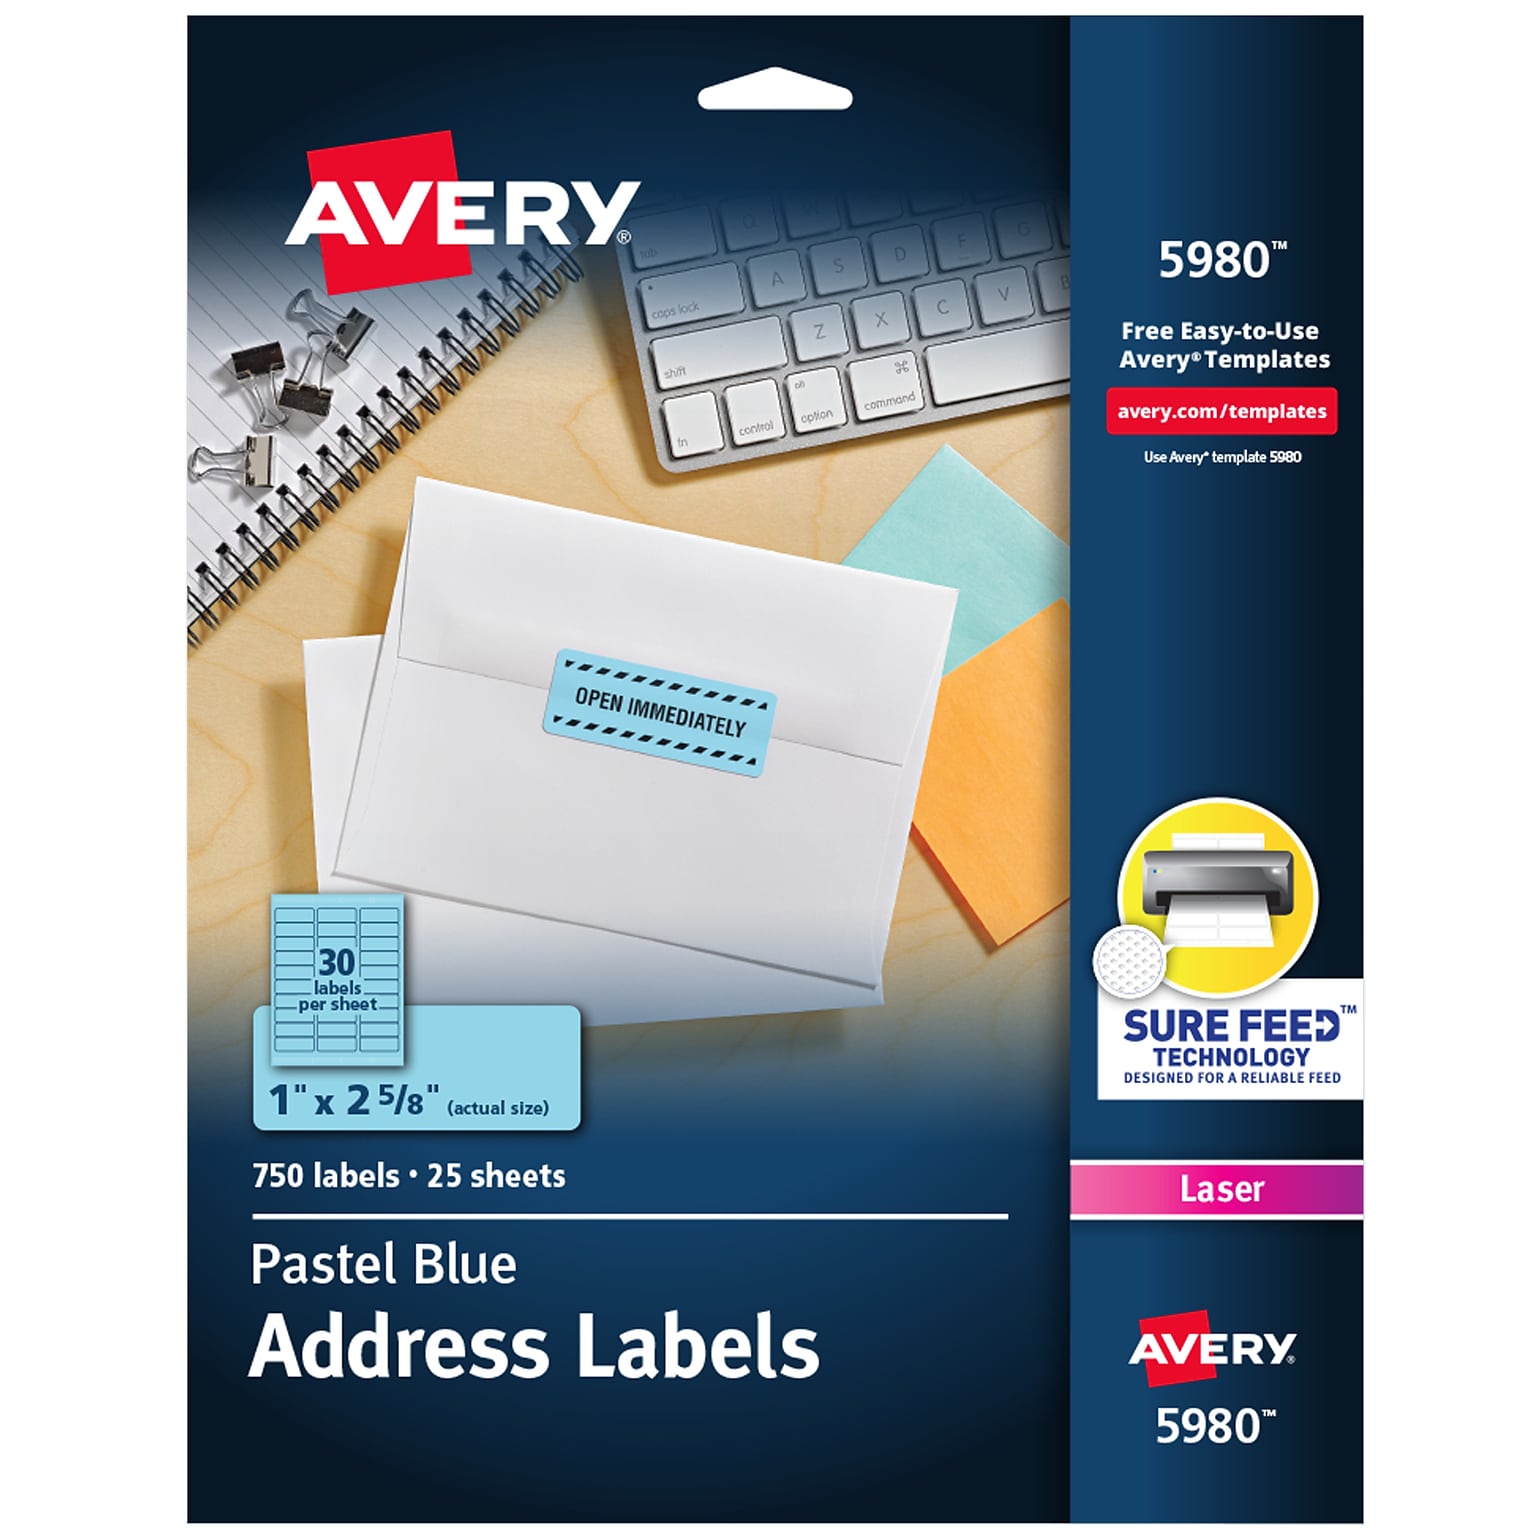 Avery Sure Feed Laser Address Labels, 1 x 2 5/8, Pastel Blue, 30 Labels/Sheet, 25 Sheets/Pack   (5980)